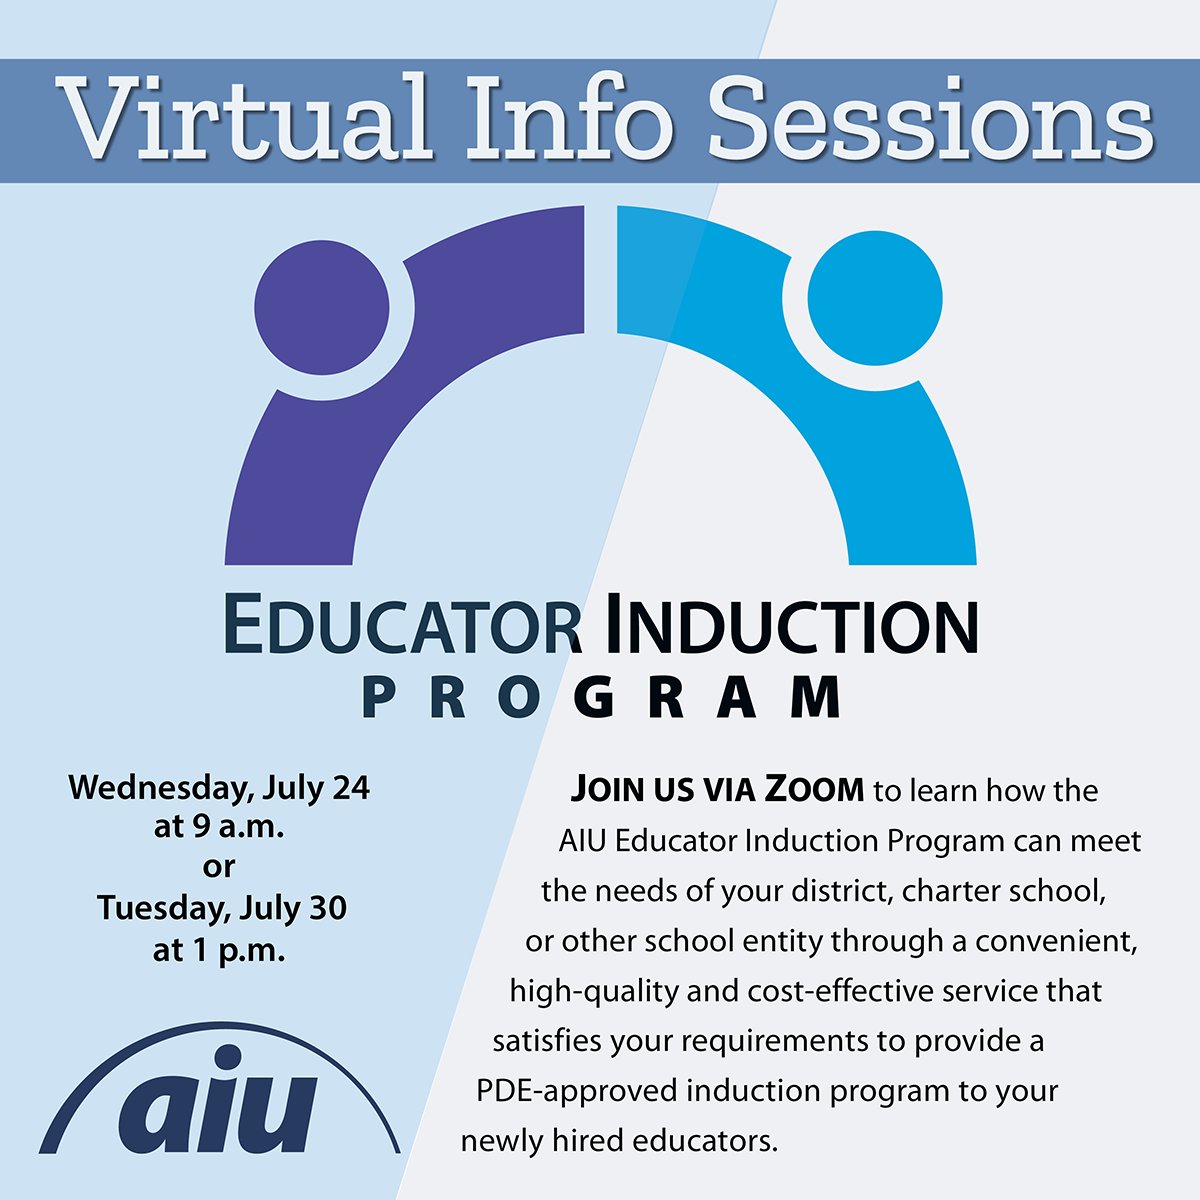 Learn about our convenient, high-quality & cost-effective Educator Induction Program that satisfies PDE #teacherinduction requirements for newly hired educators. Join our FREE virtual info sessions: 7/24 at 9 a.m. or 7/30 at 1 p.m. loom.ly/jtYJuYM. #newteachers